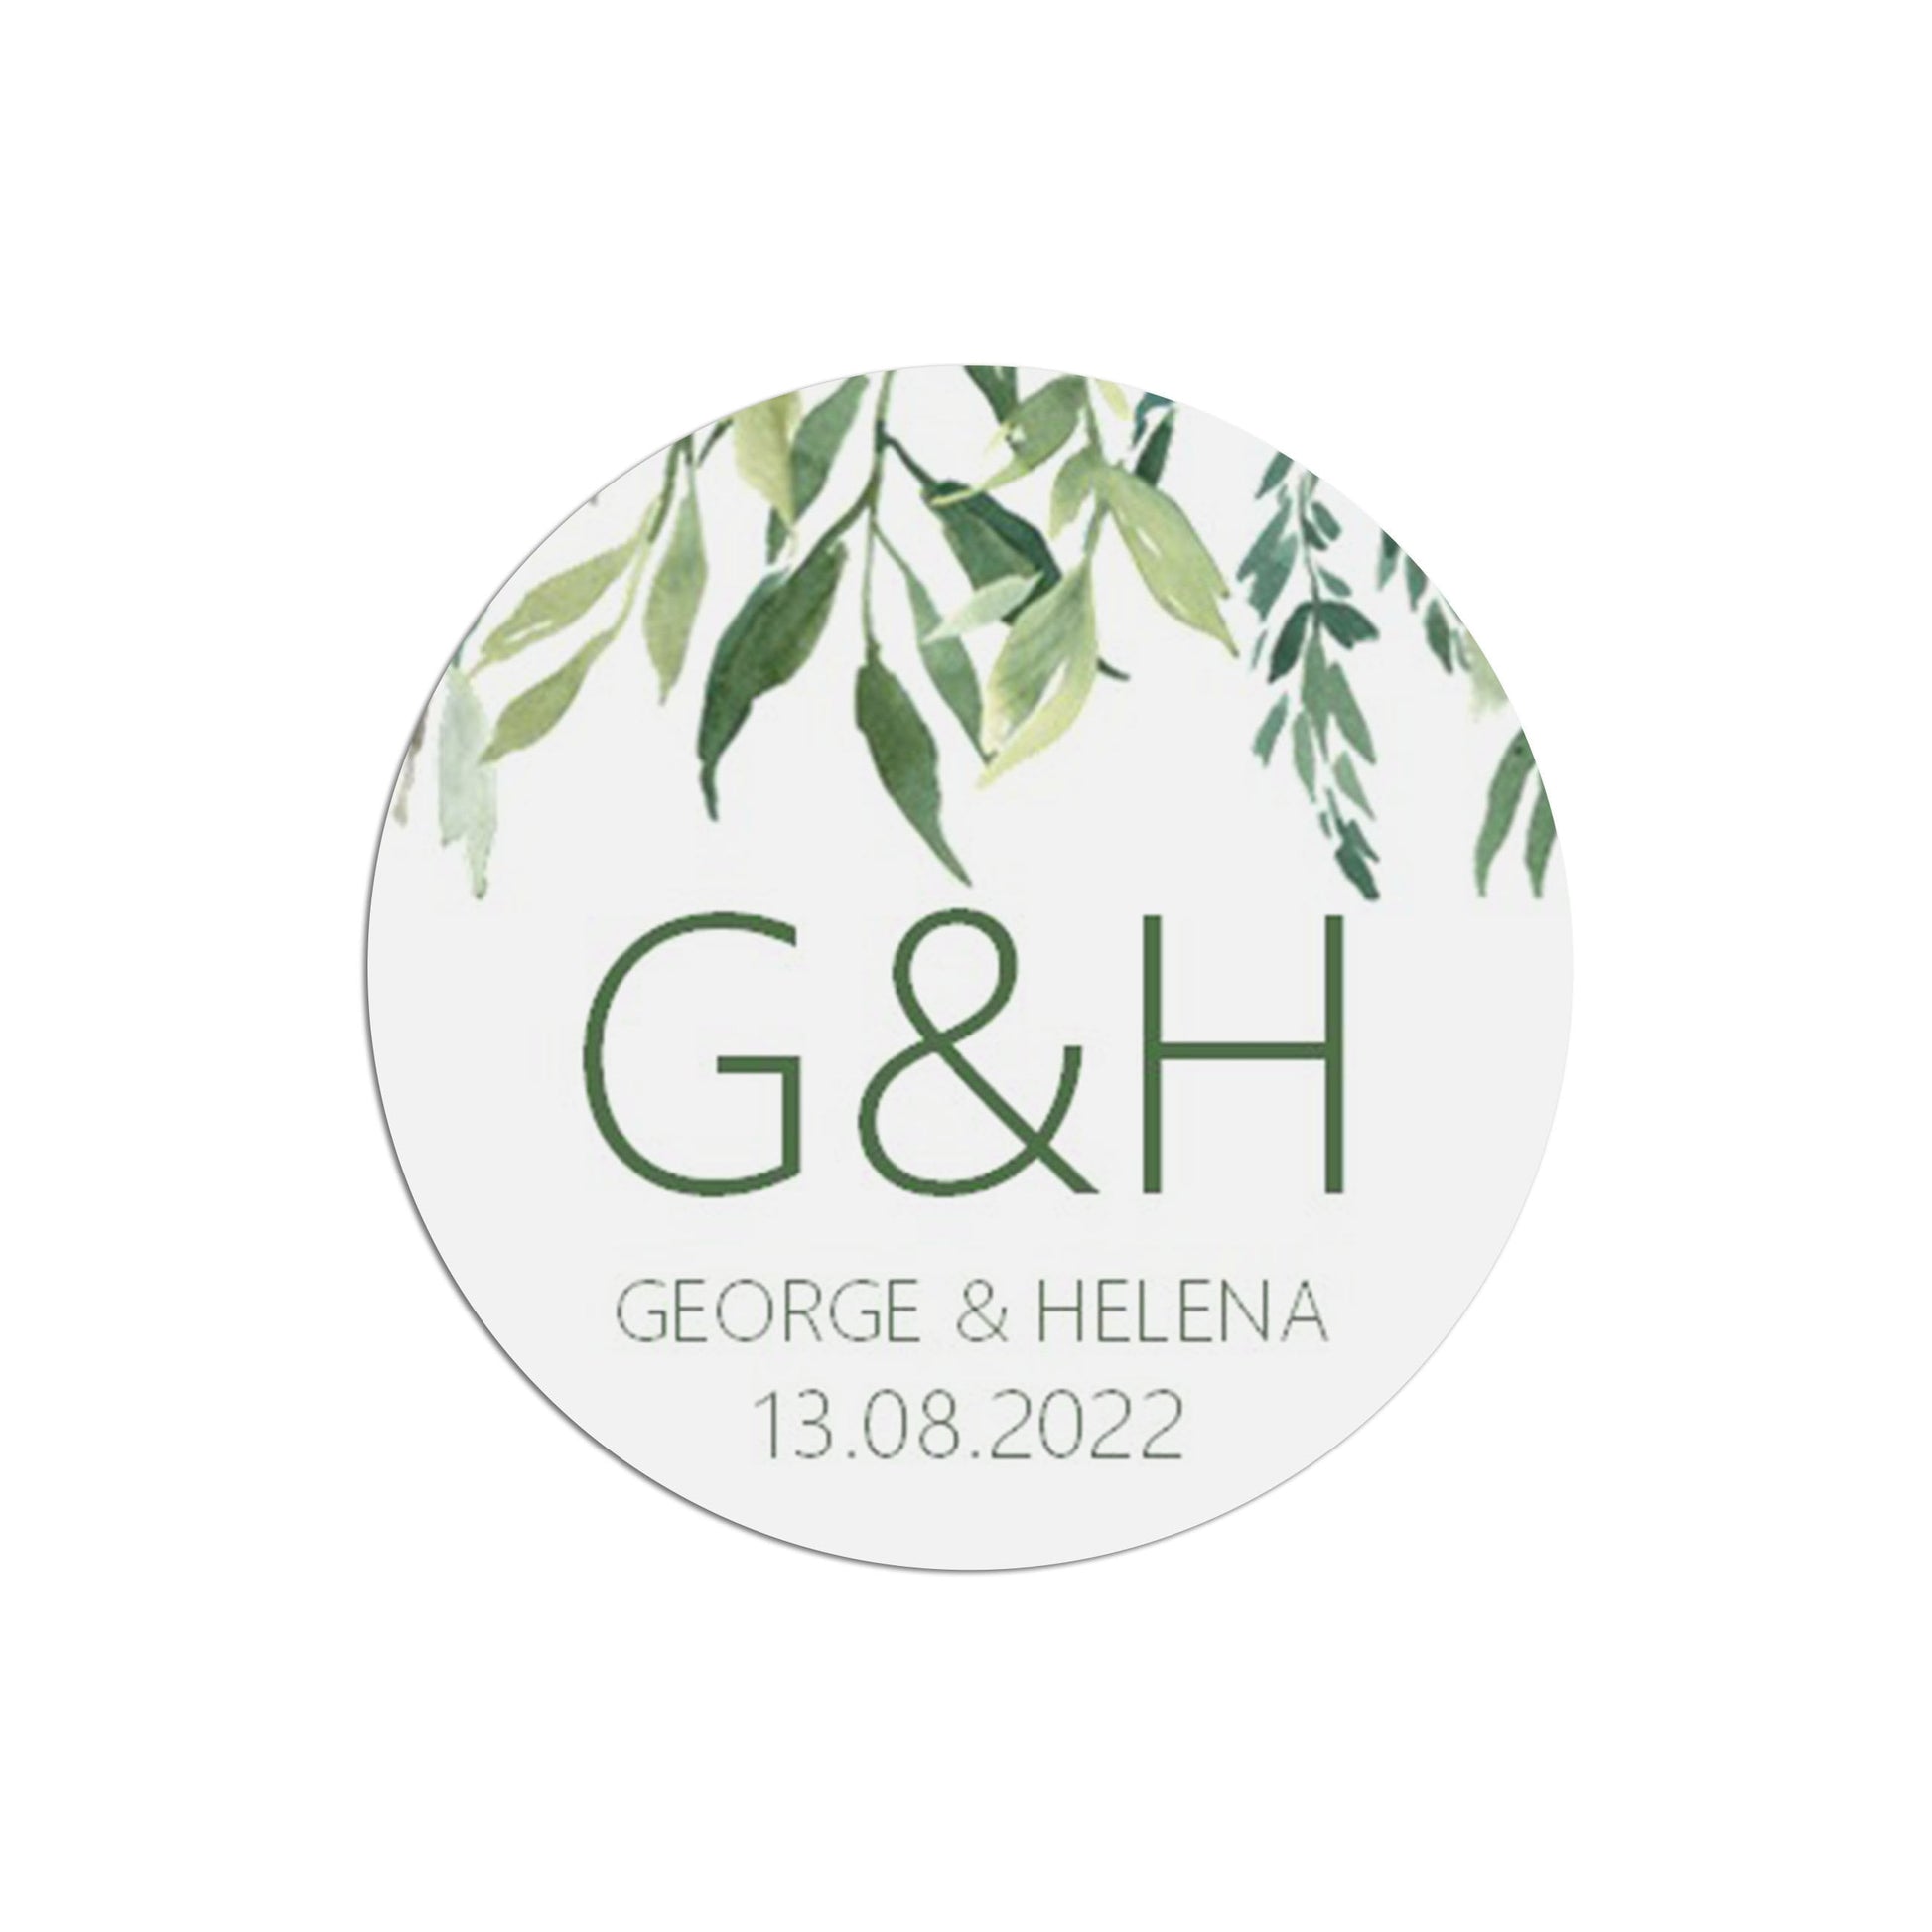 Monogram Initials Wedding Stickers, Greenery 37mm Round With Personalisation At The Bottom x 35 Stickers Per Sheet